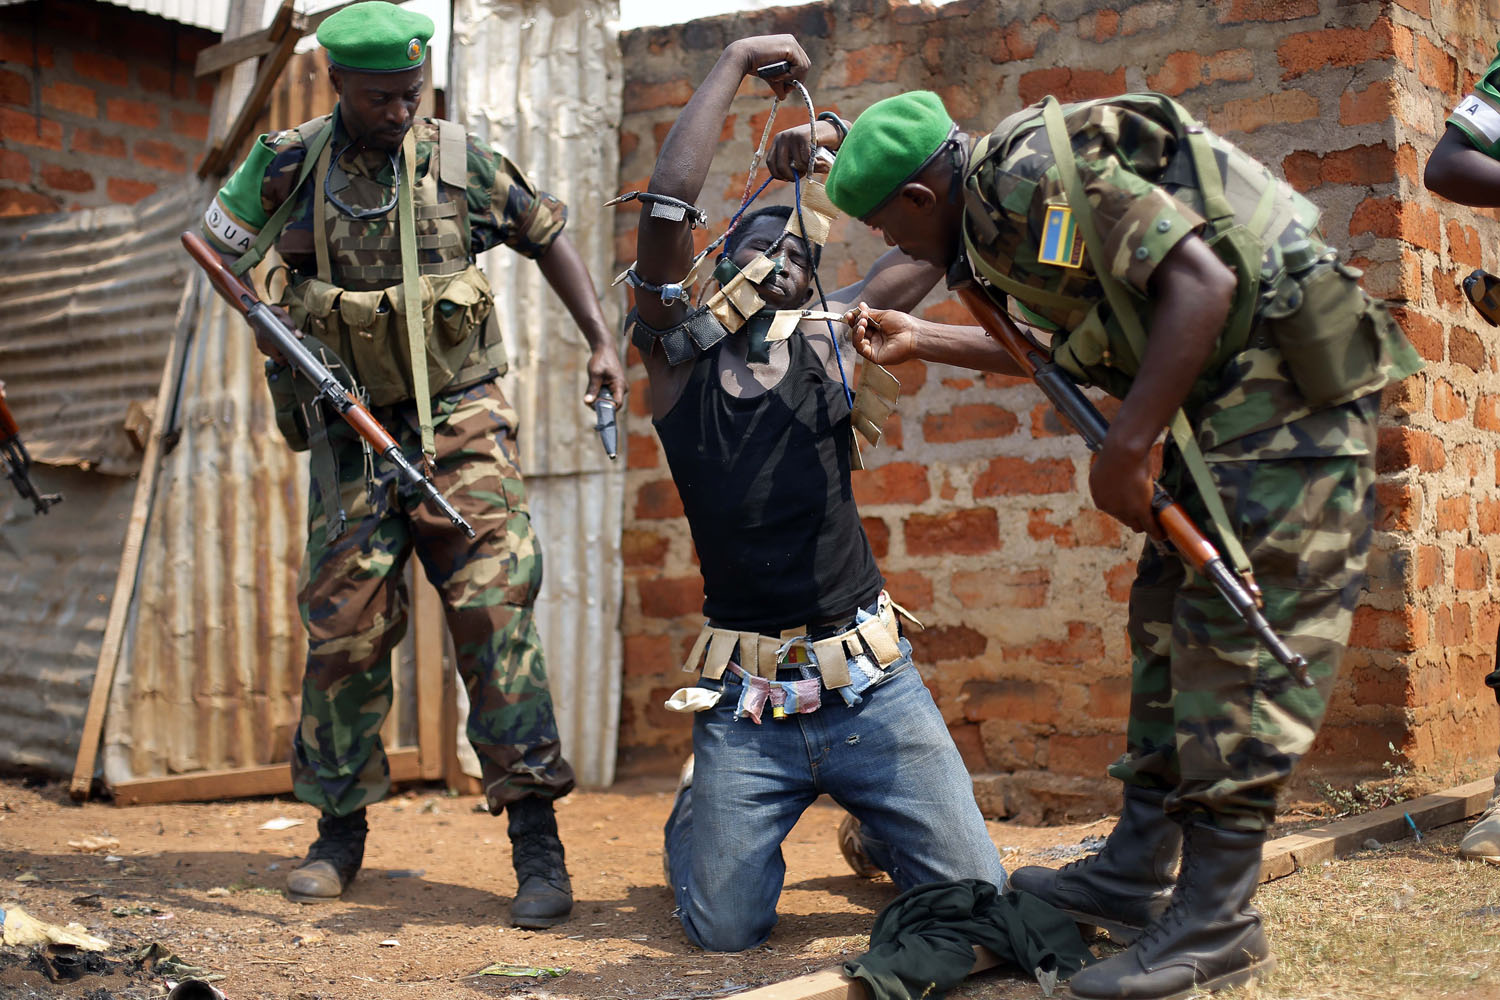 Jan. 22, 2014. Rwandan African Union peacekeepers remove the lucky charms from a suspected Anti-Balaka Christian man who was found with a rifle and a grenade following looting in the Muslim market of the PK13 district of Bangui, Central African Republic.